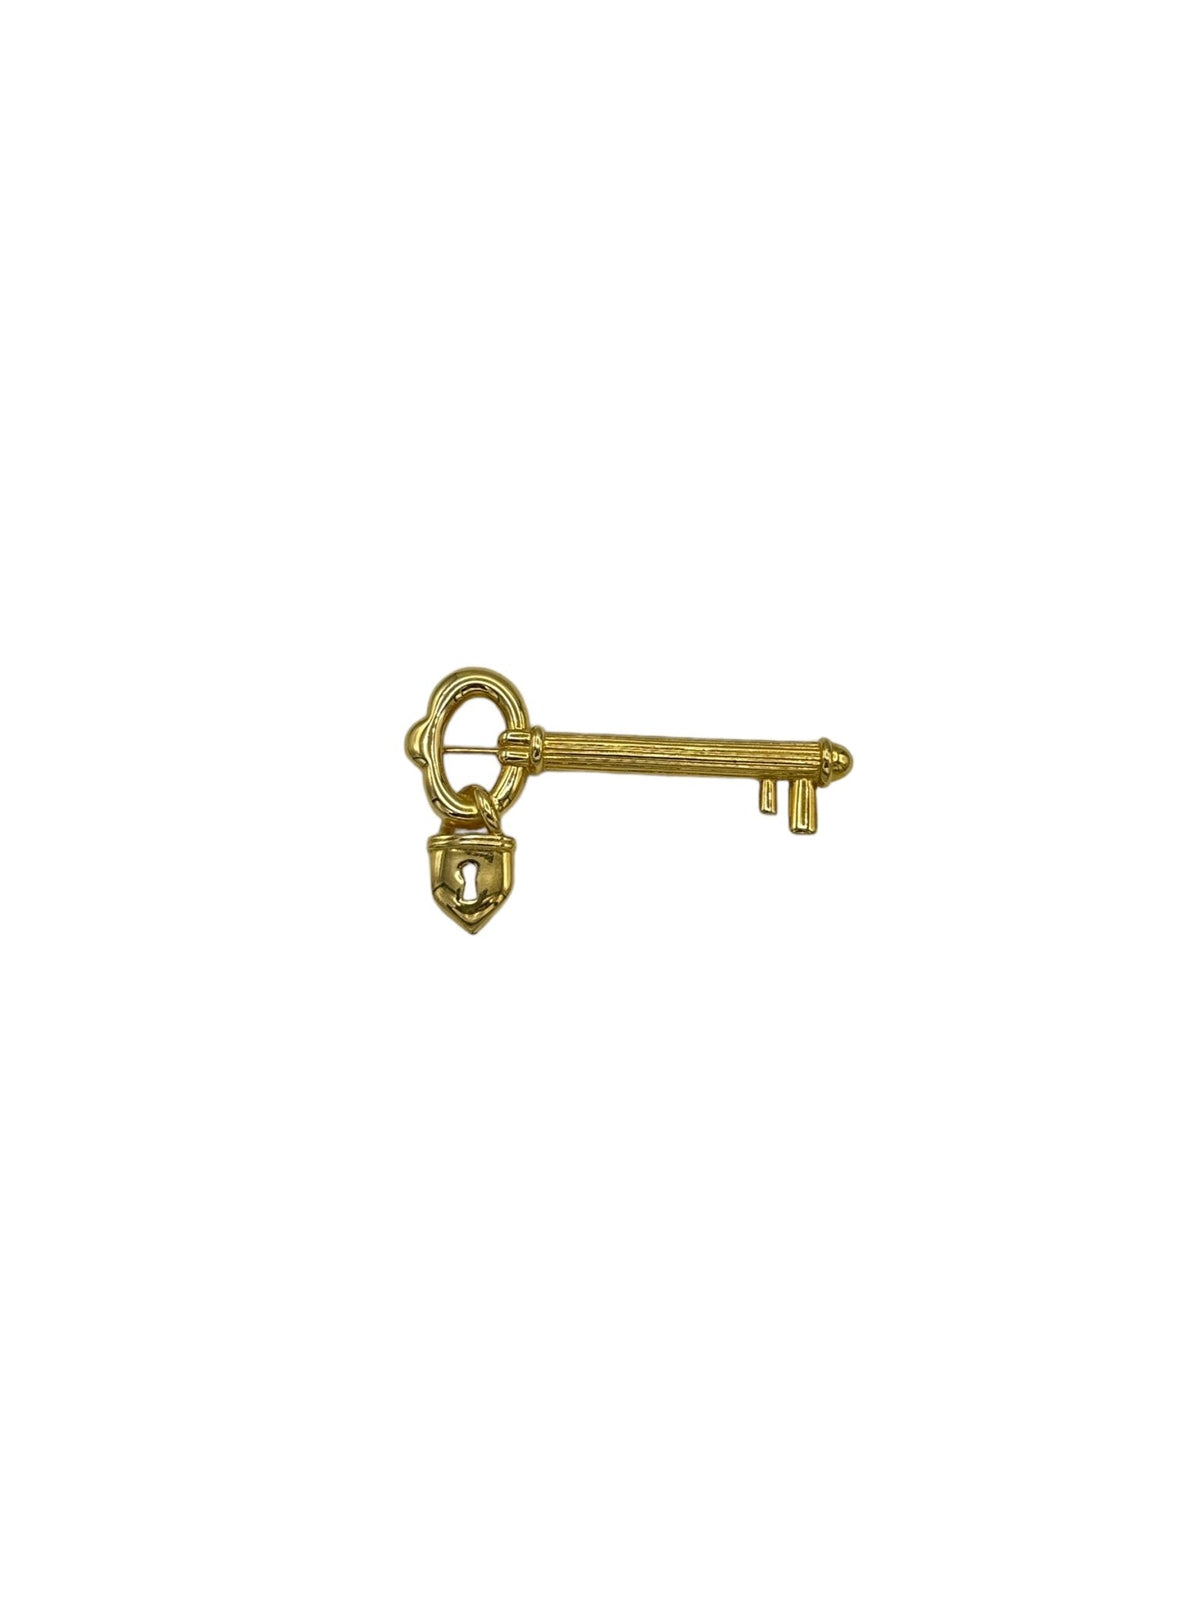 Monet Classic Gold Lock & Key Brooch - 24 Wishes Vintage Jewelry